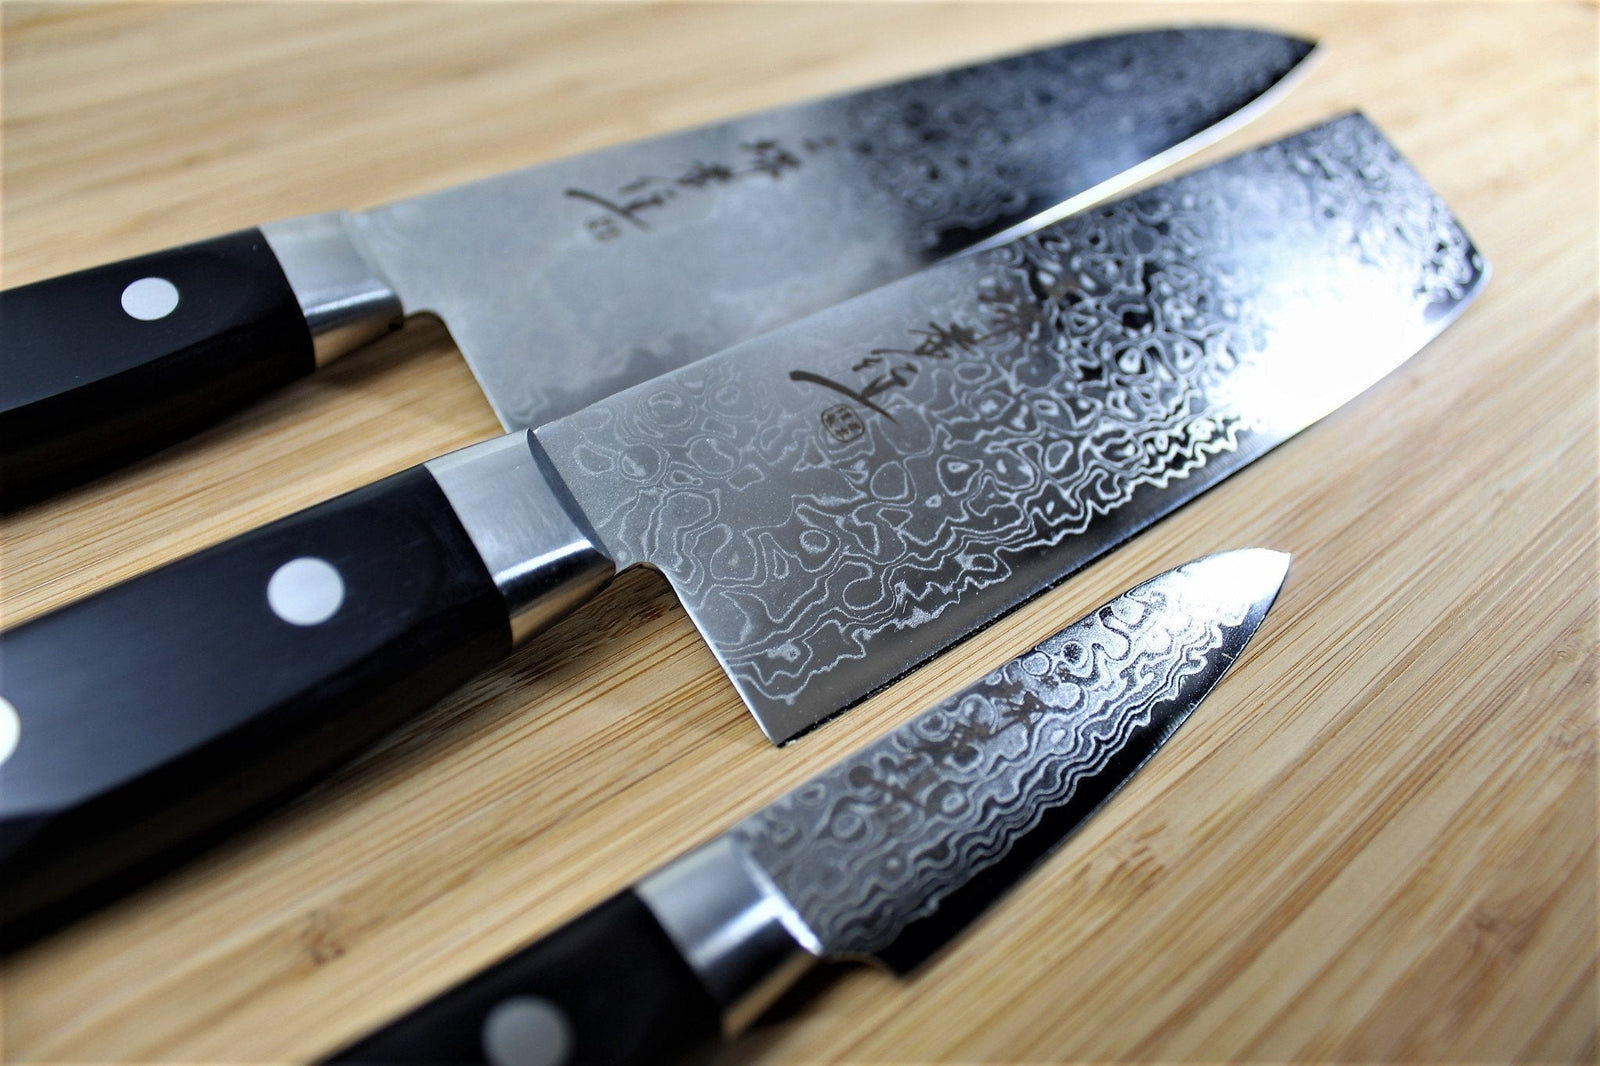 SOWOLL High Quality Japanese Chef Stainless Steel Knife 4 Pcs Kitchen  Knives Knives Set Kitchen Gadgets Dishes Set Set Best Kitchen Knives Chef  Knife Set Forged Kitchen Japanese Knife Sets Ultra Sharp